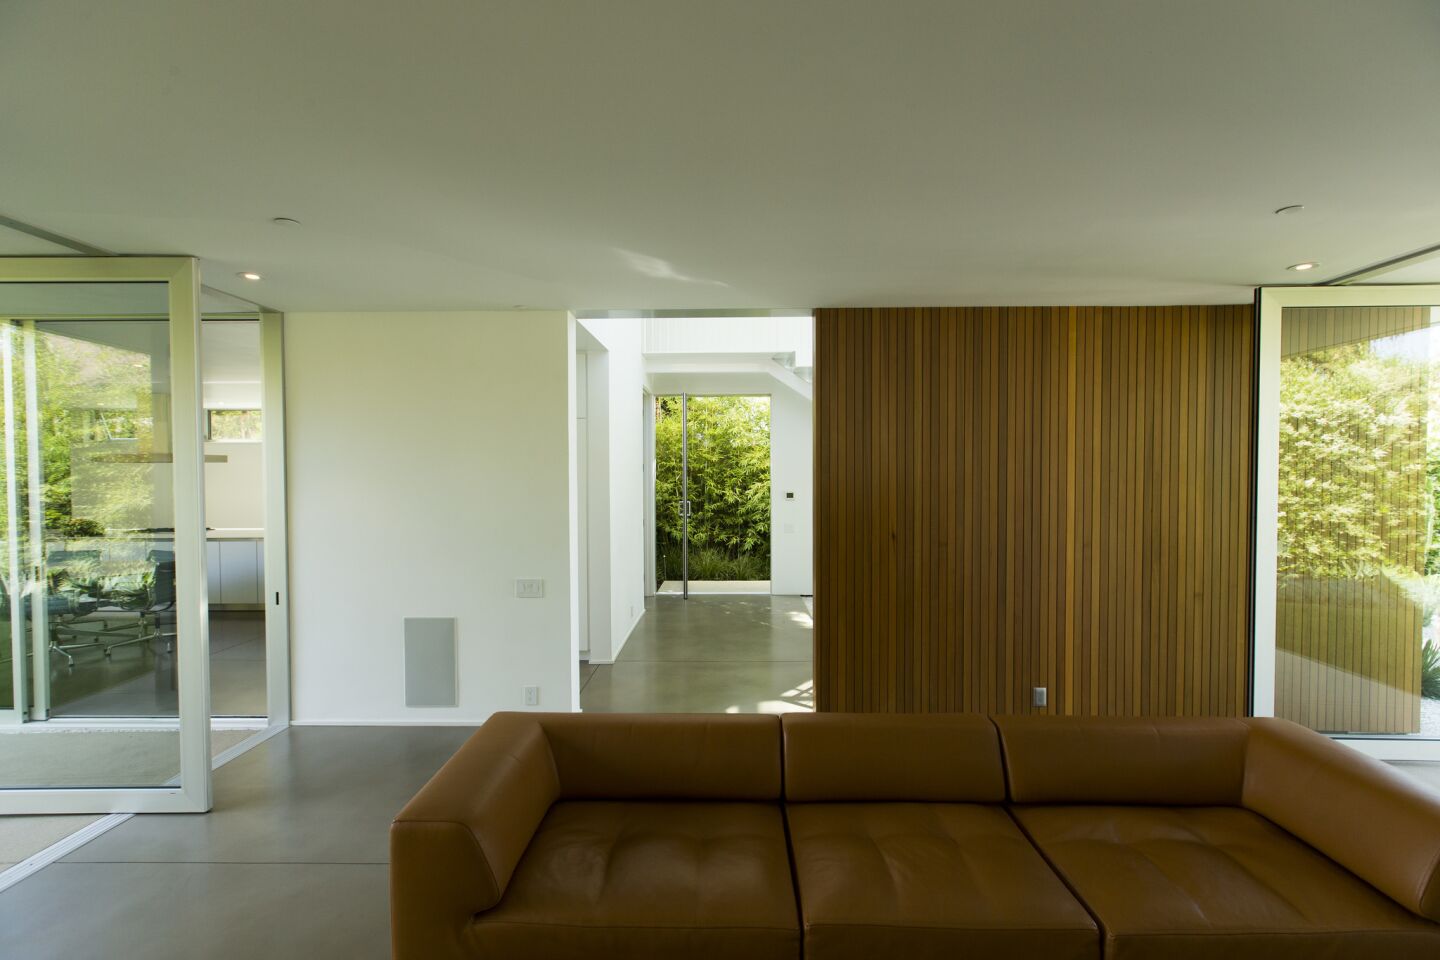 The living room area of the Midcentury Modern home designed by Woods + Dangaran.